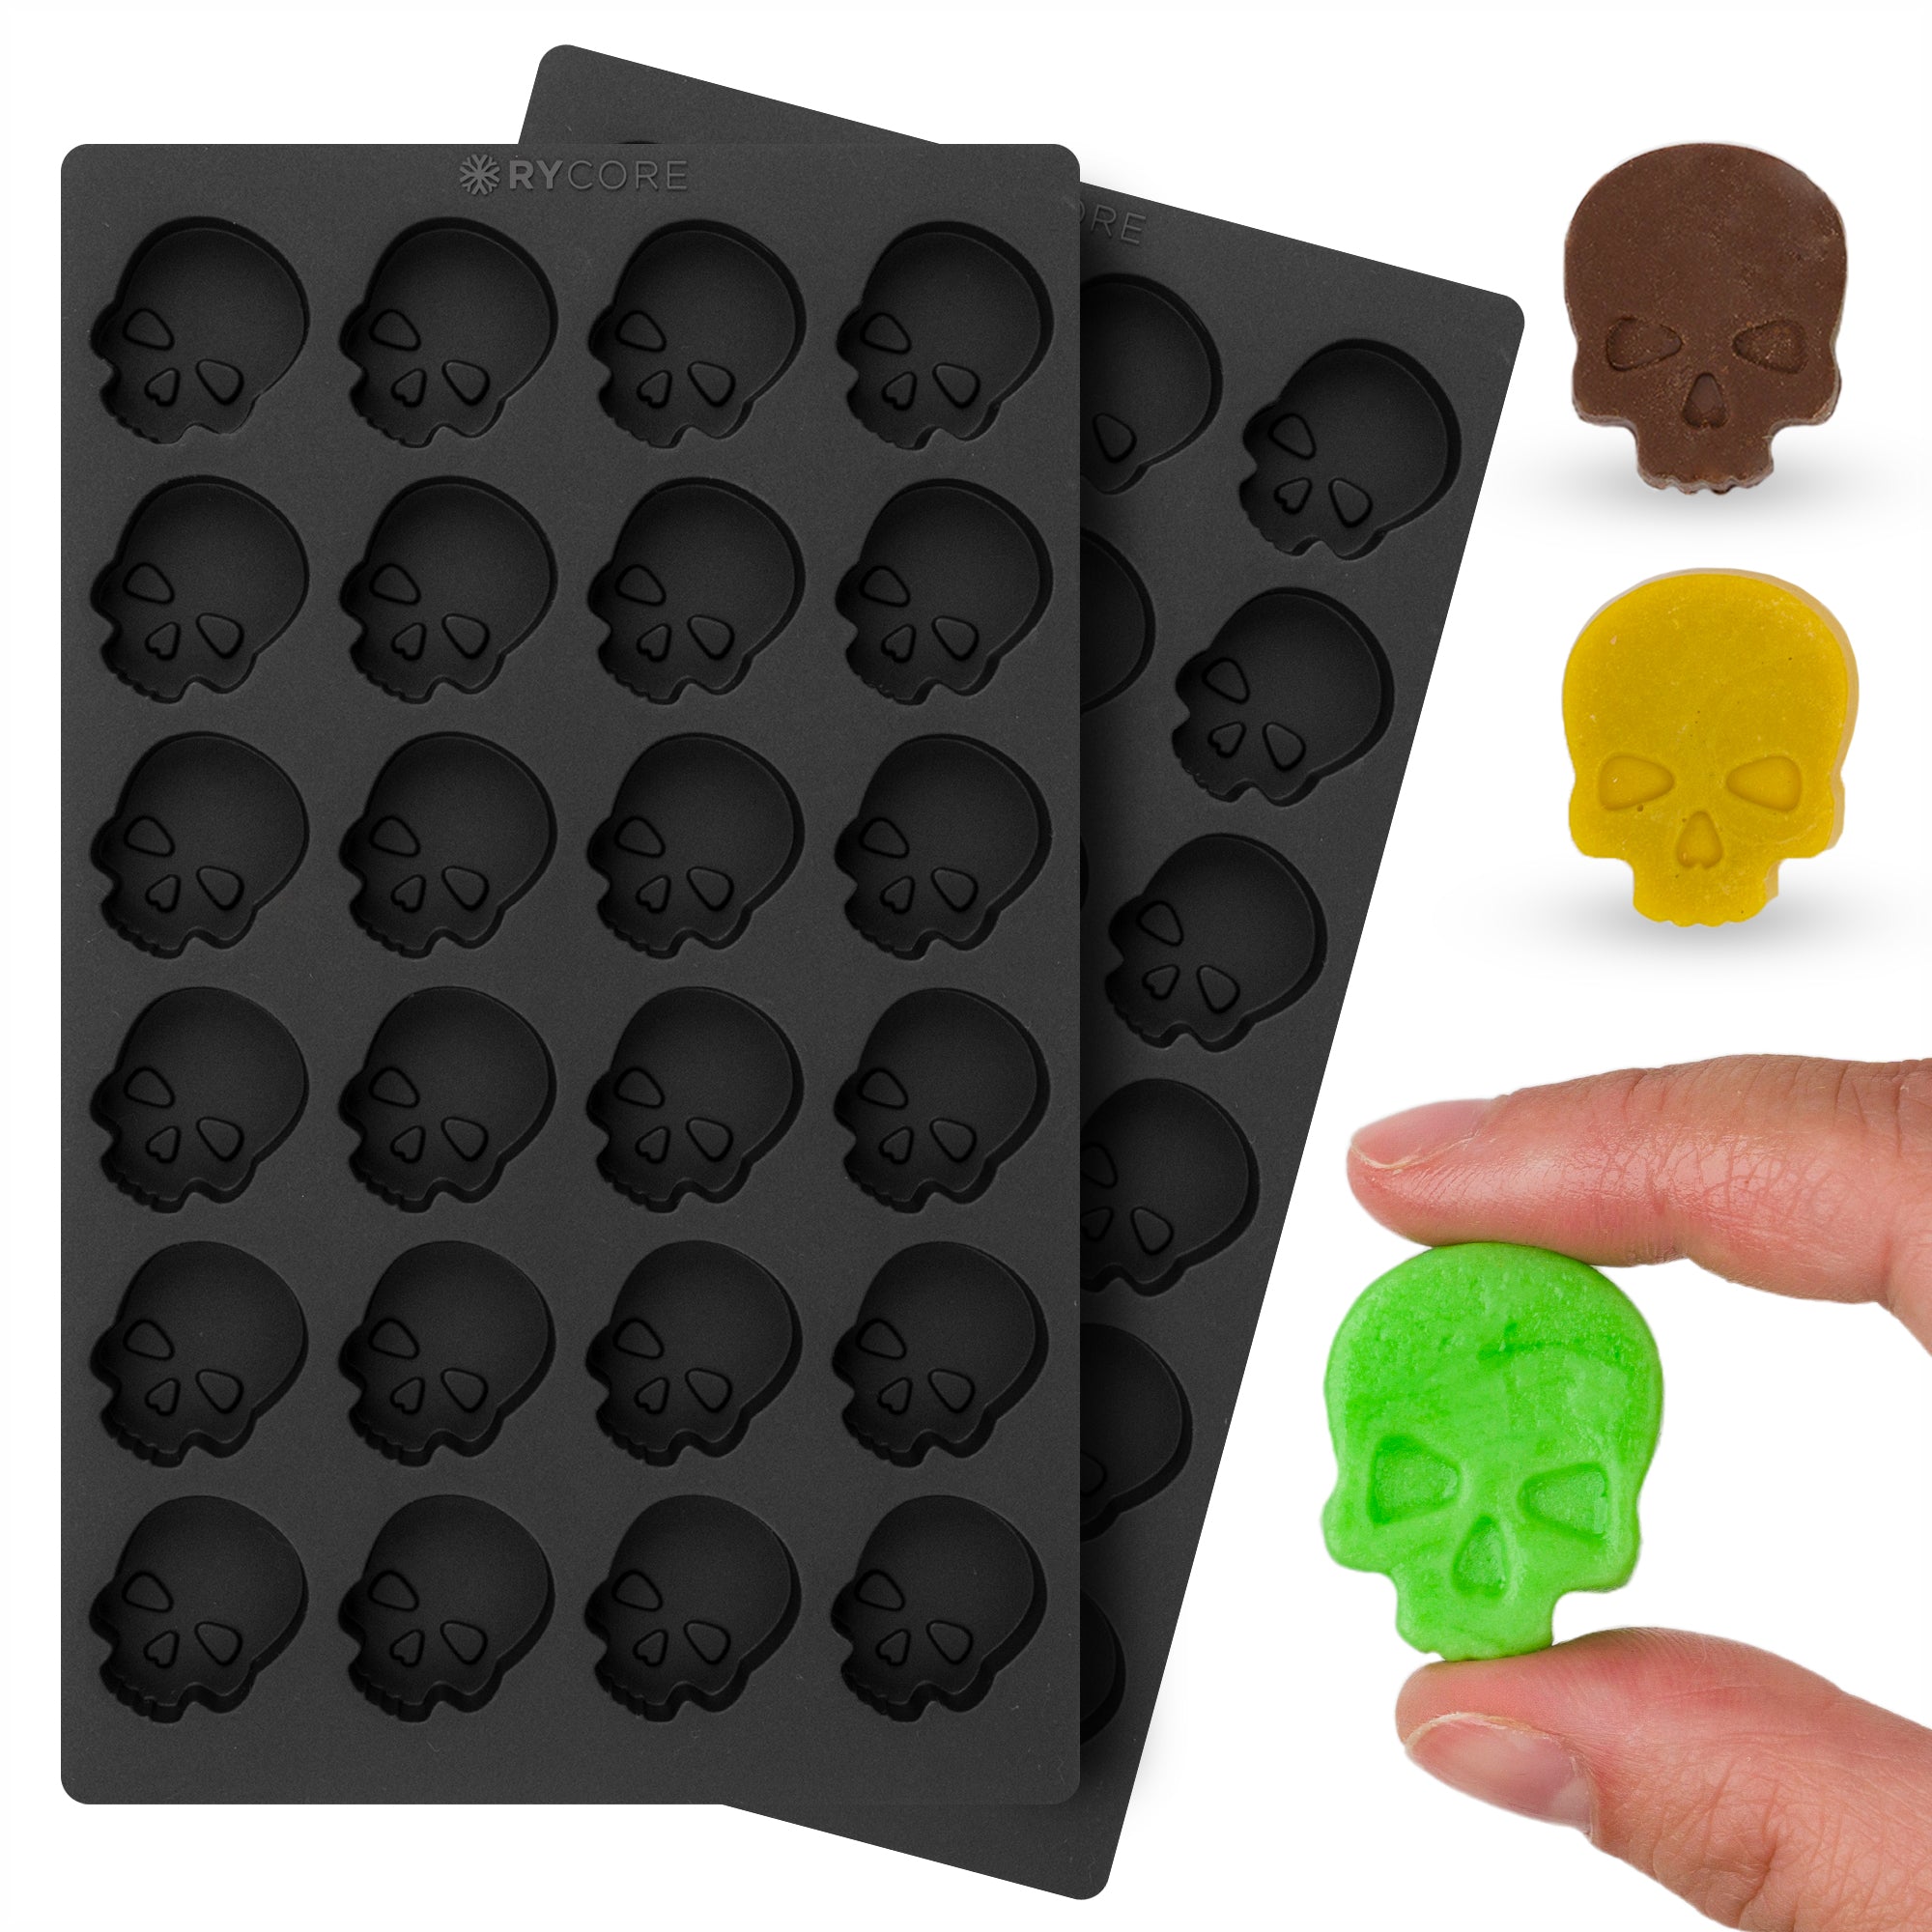 2 Pack - Silicone Skull Mold for Baking, Chocolates & Desserts | Distinctive Skull Design Mini Mold - Craft Candies, Jellies Themed Treats - Premium Quality Skull Molds for Chocolate, Holiday Events